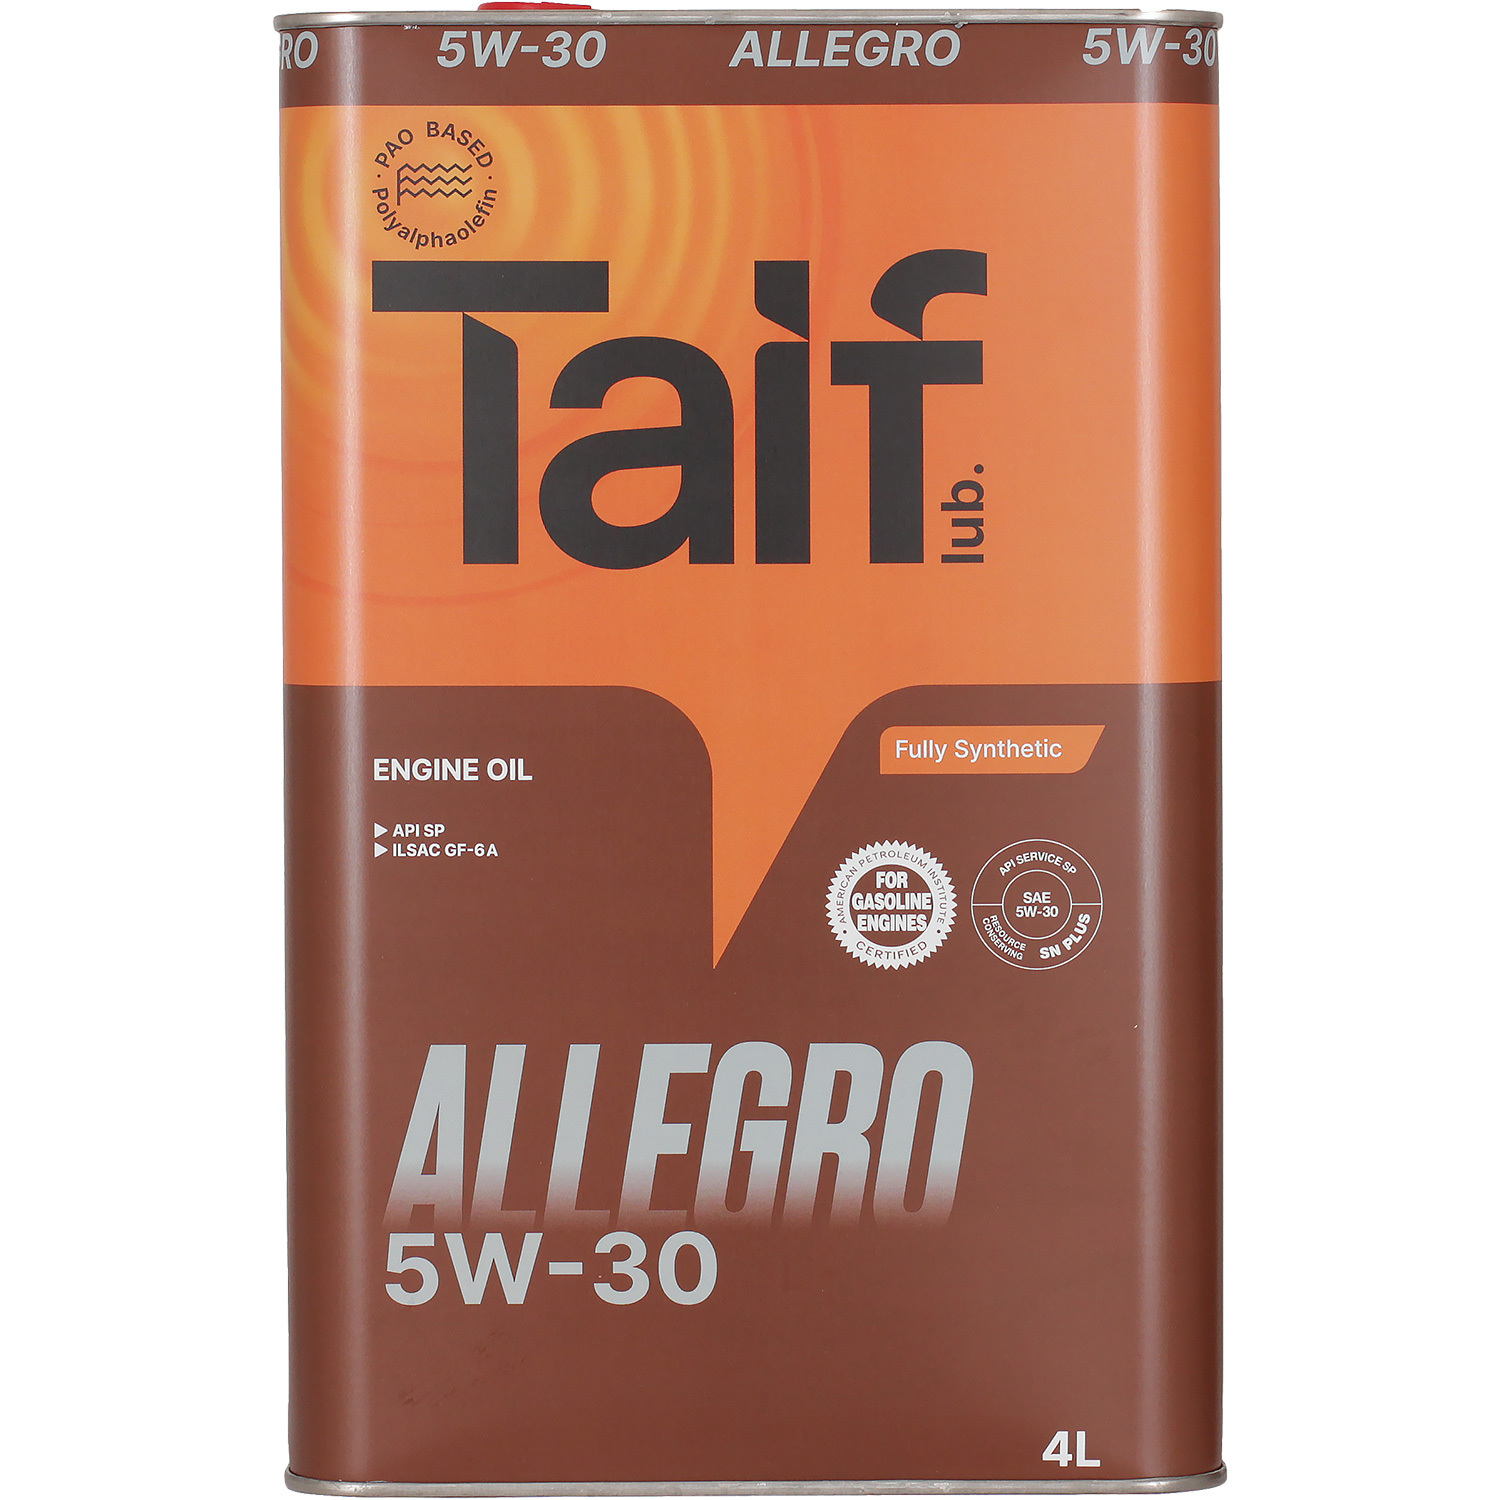 Моторное масло Taif ALLEGRO 5W-30, 4 л - фото 1